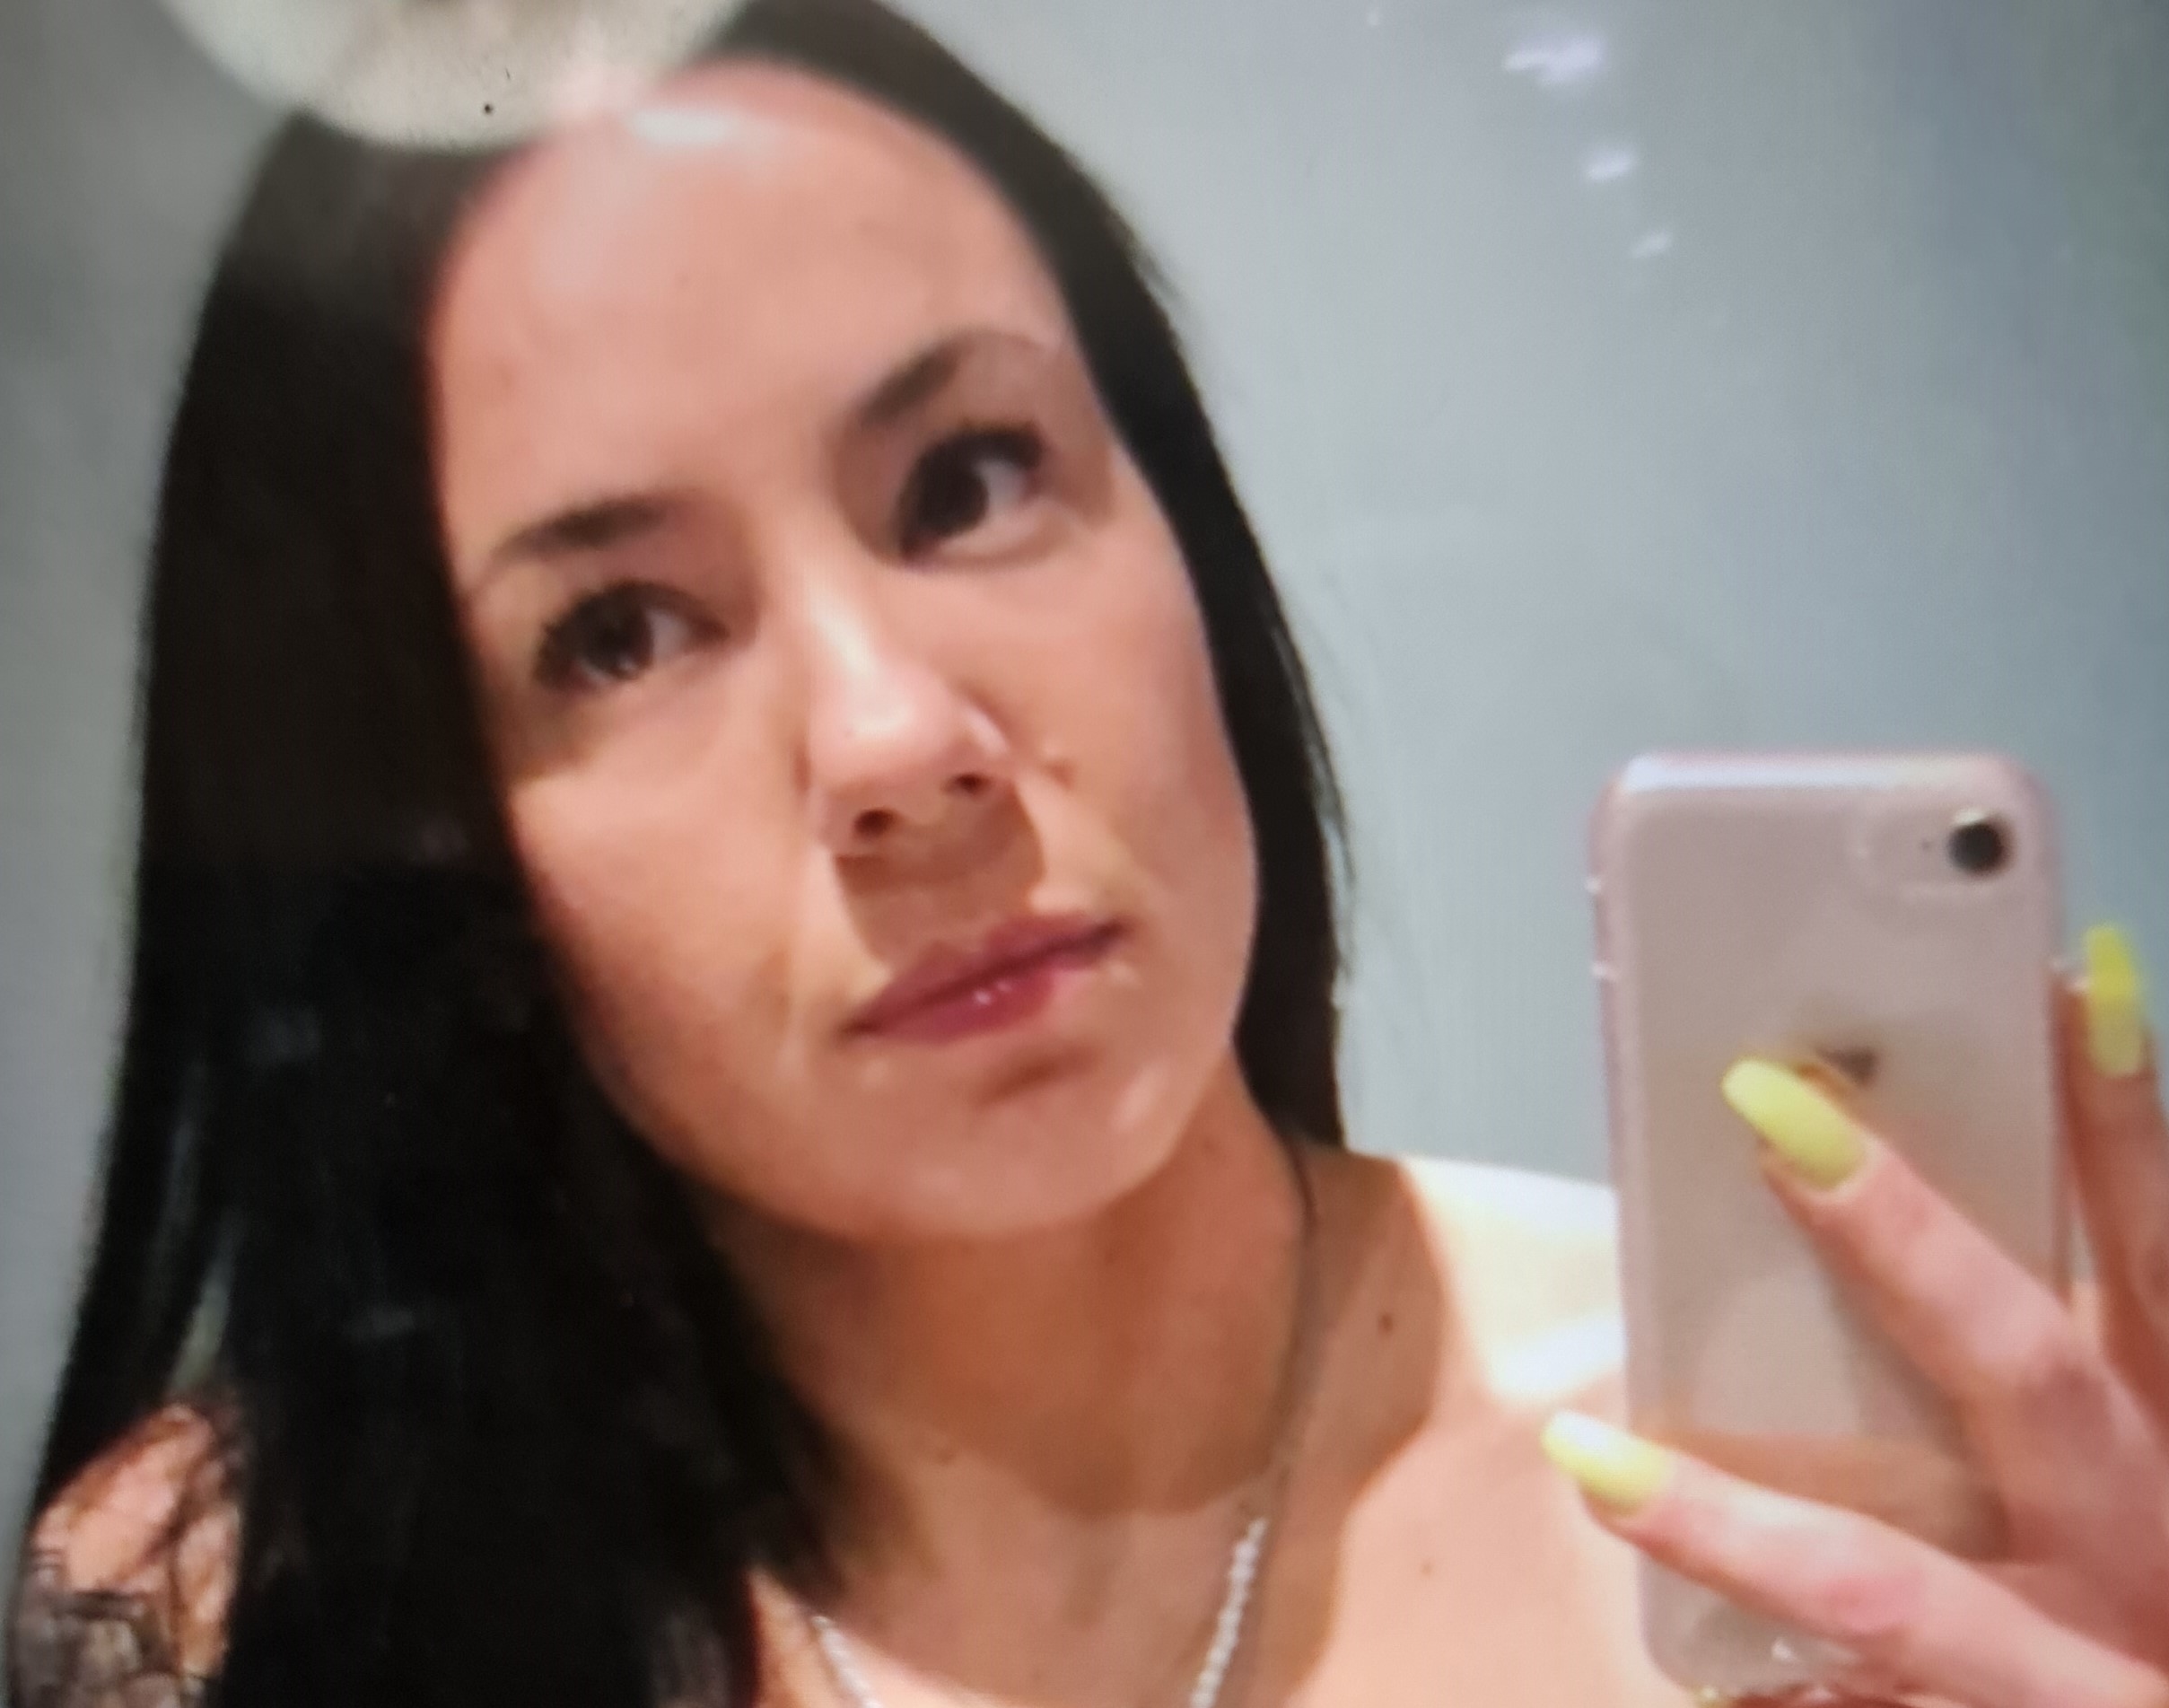 Gardaí appeal for help on missing woman